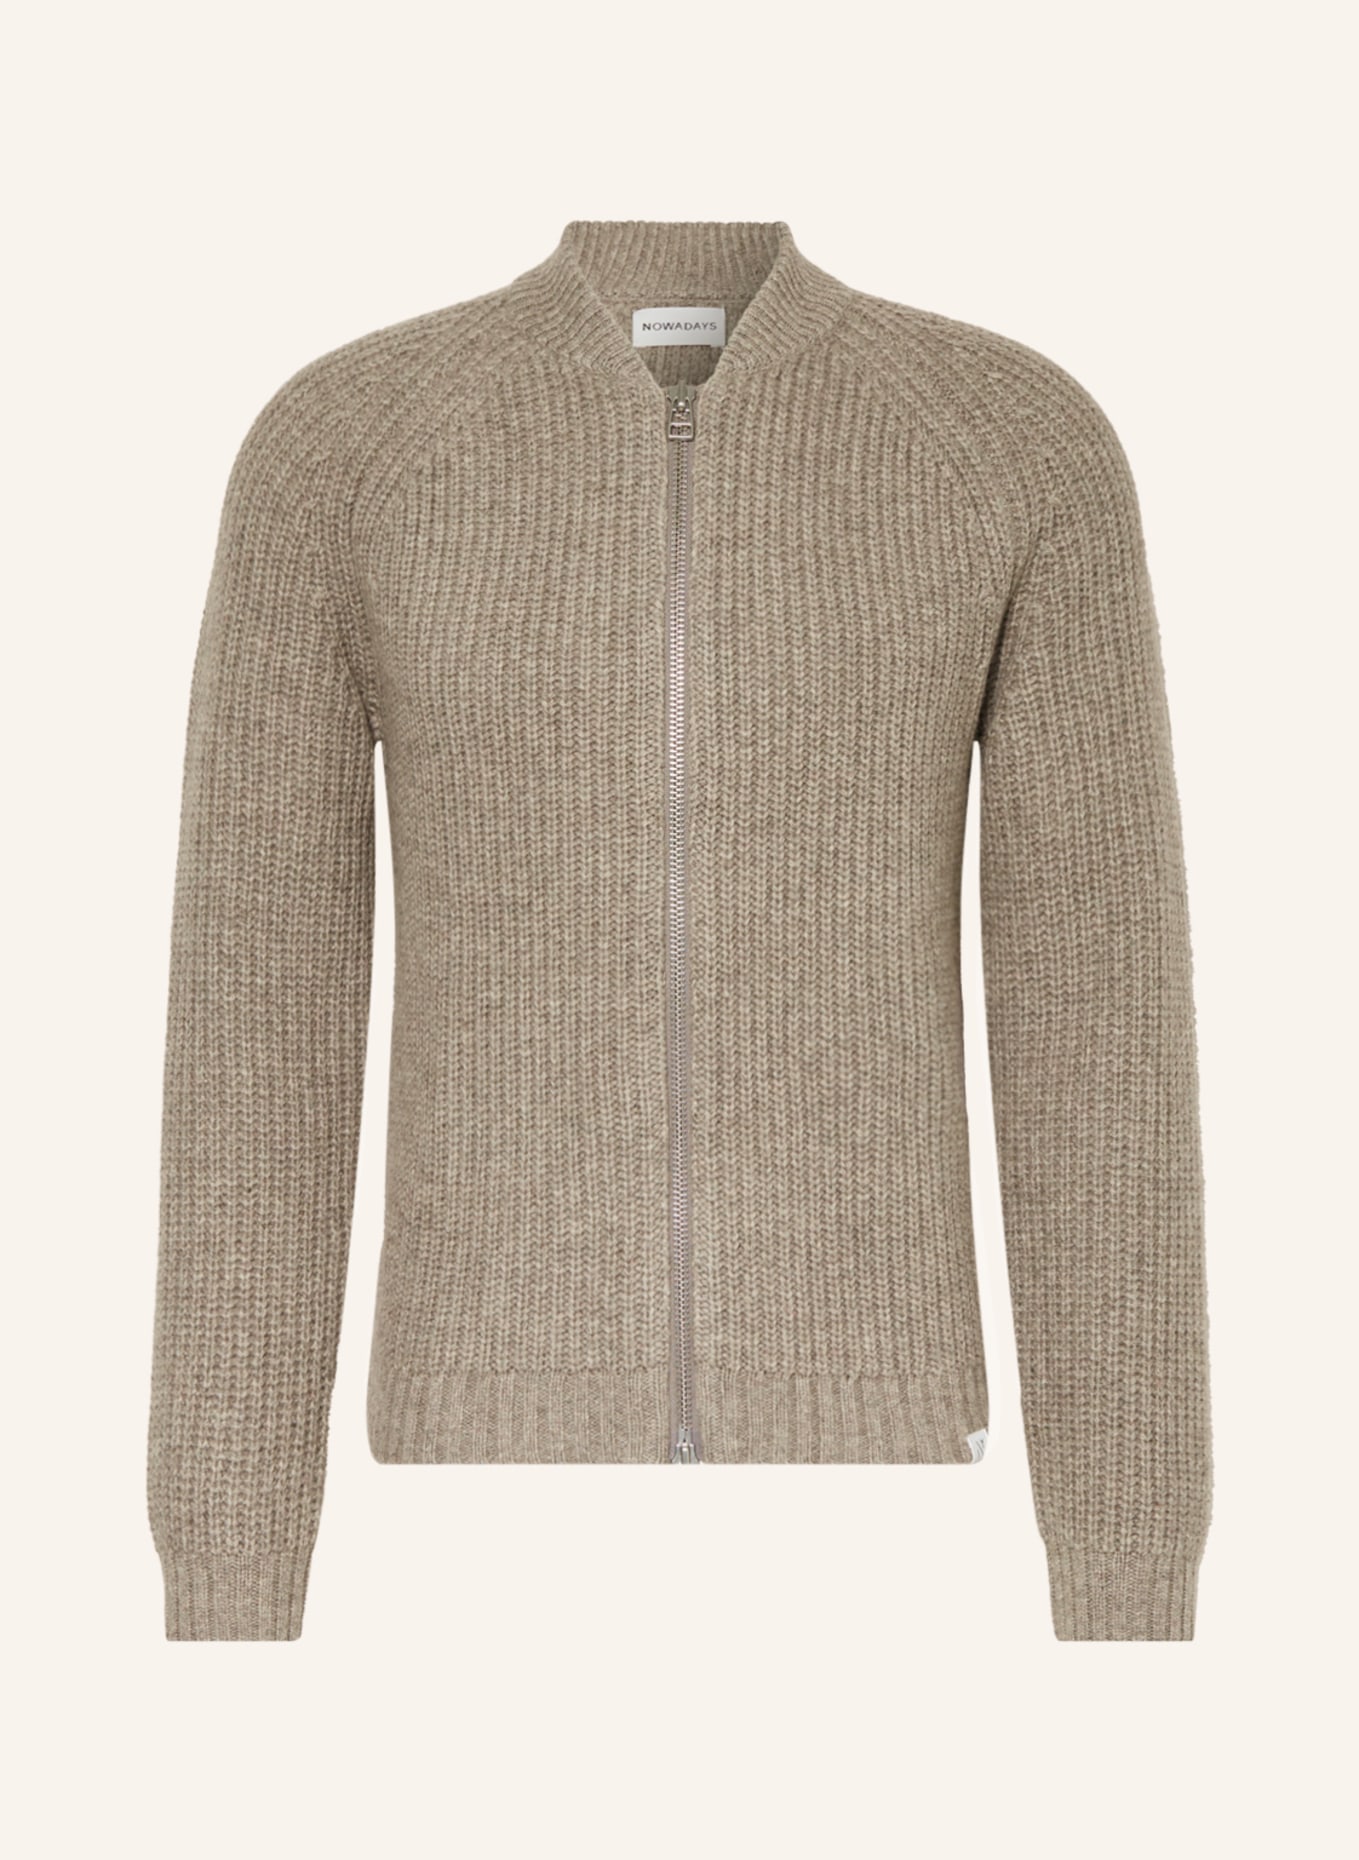 NOWADAYS Cardigan, Color: TAUPE (Image 1)